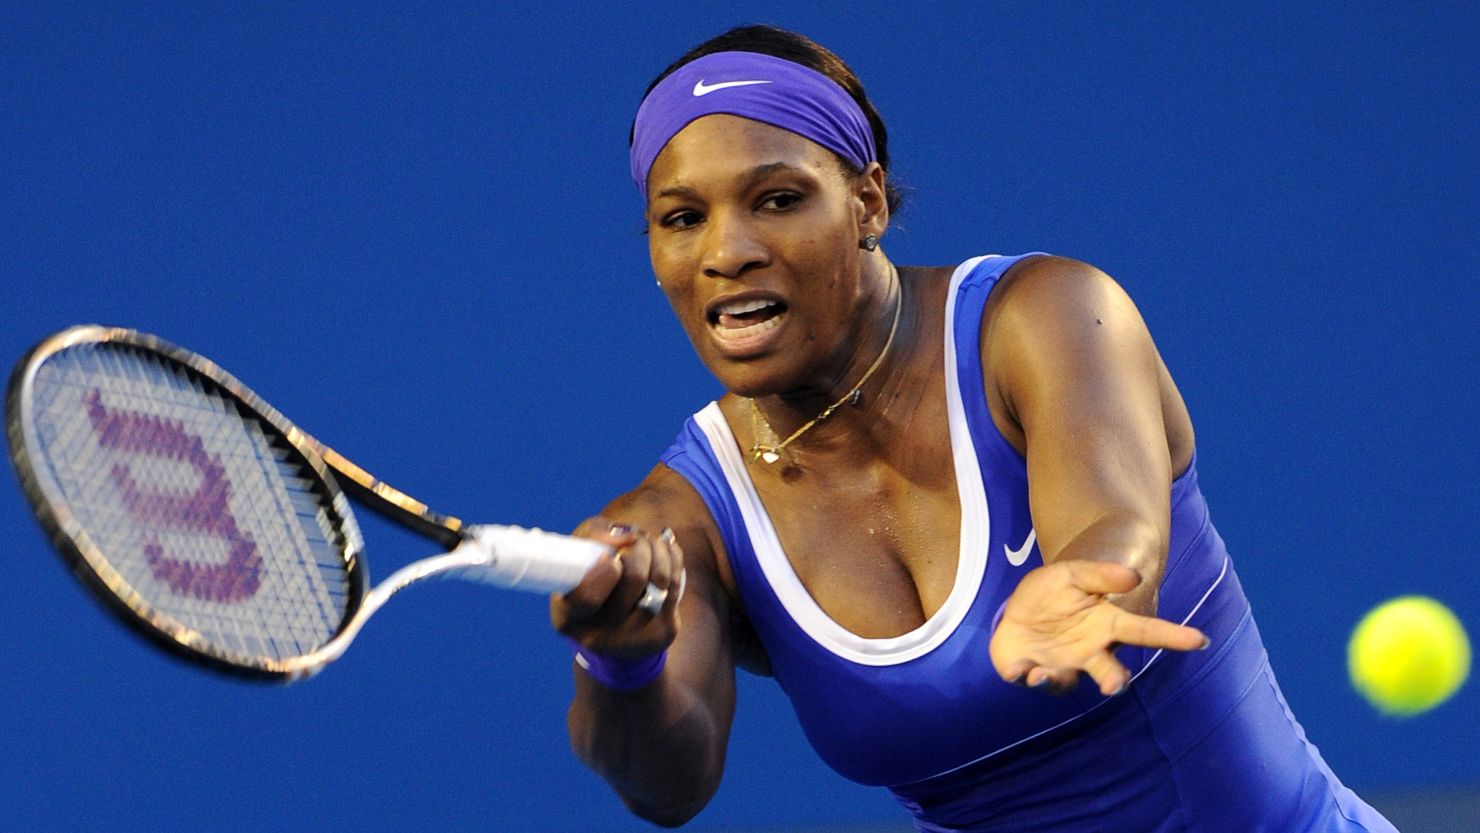 Serena Williams completed a easy victory over Hungary's Greta Arn in the third round of the Australian Open on Saturday.